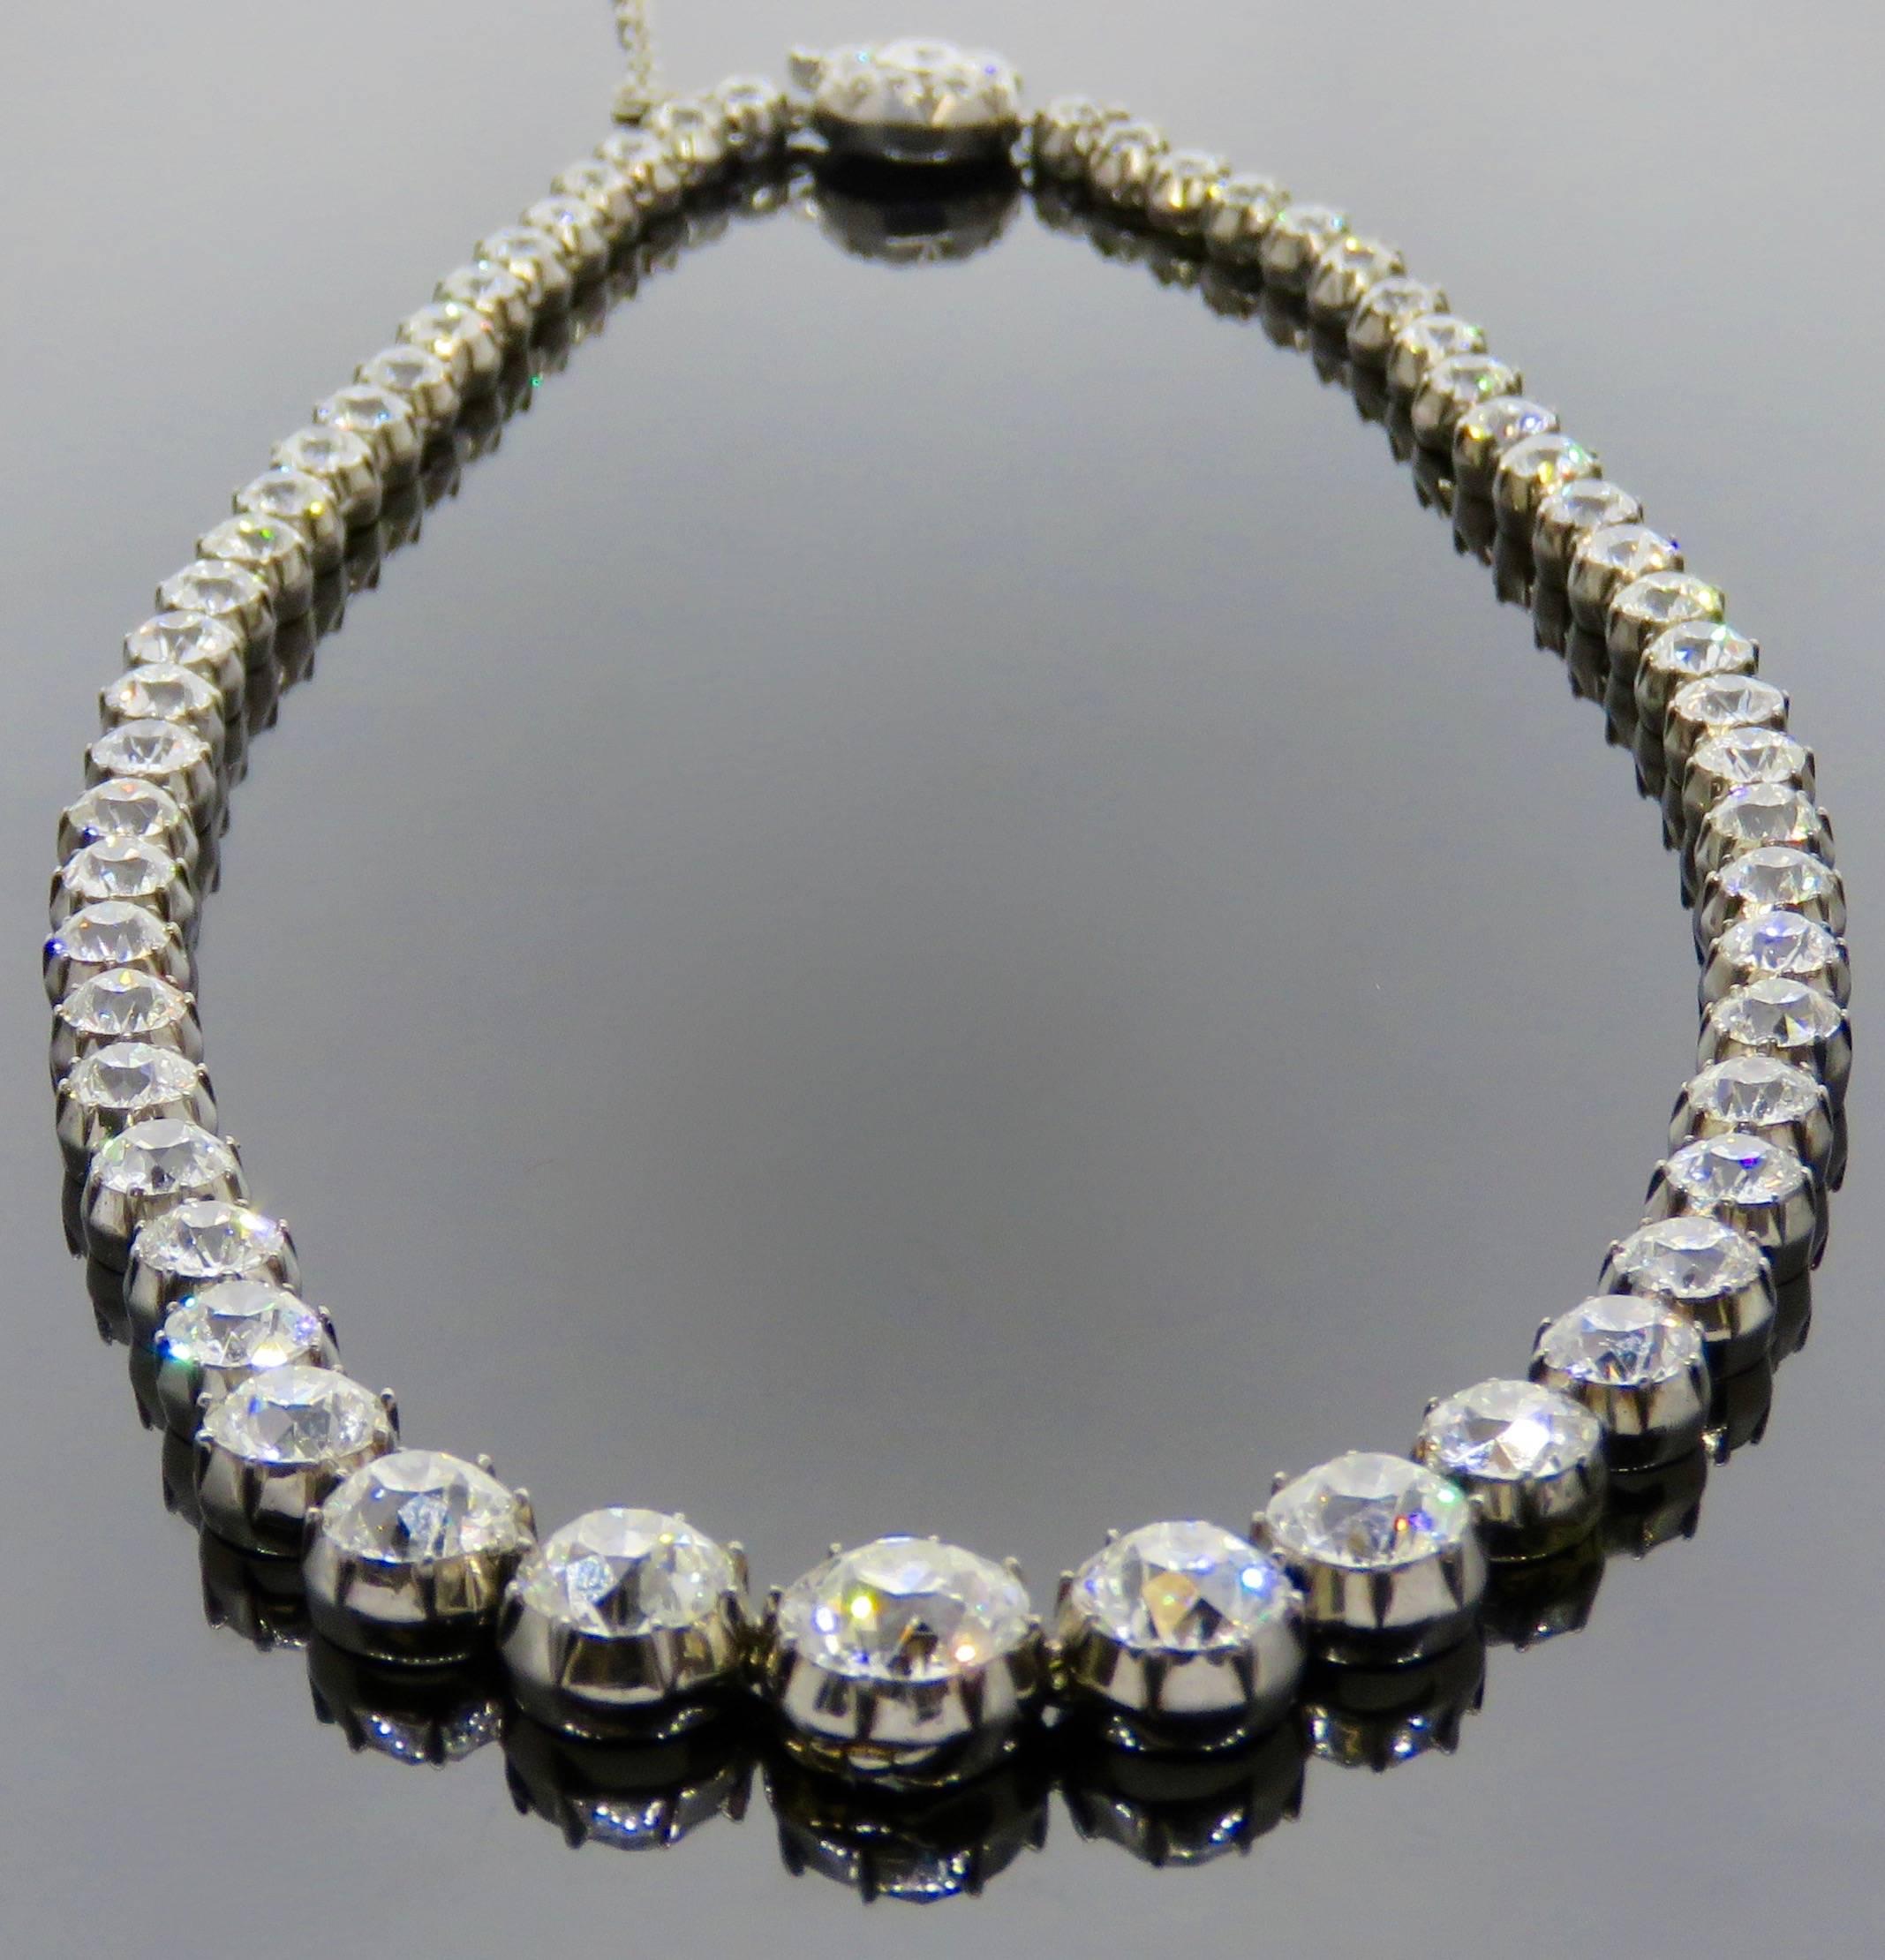 The necklace has 66 Old Mine Diamonds weighing approximately 30 Carats total weight. 